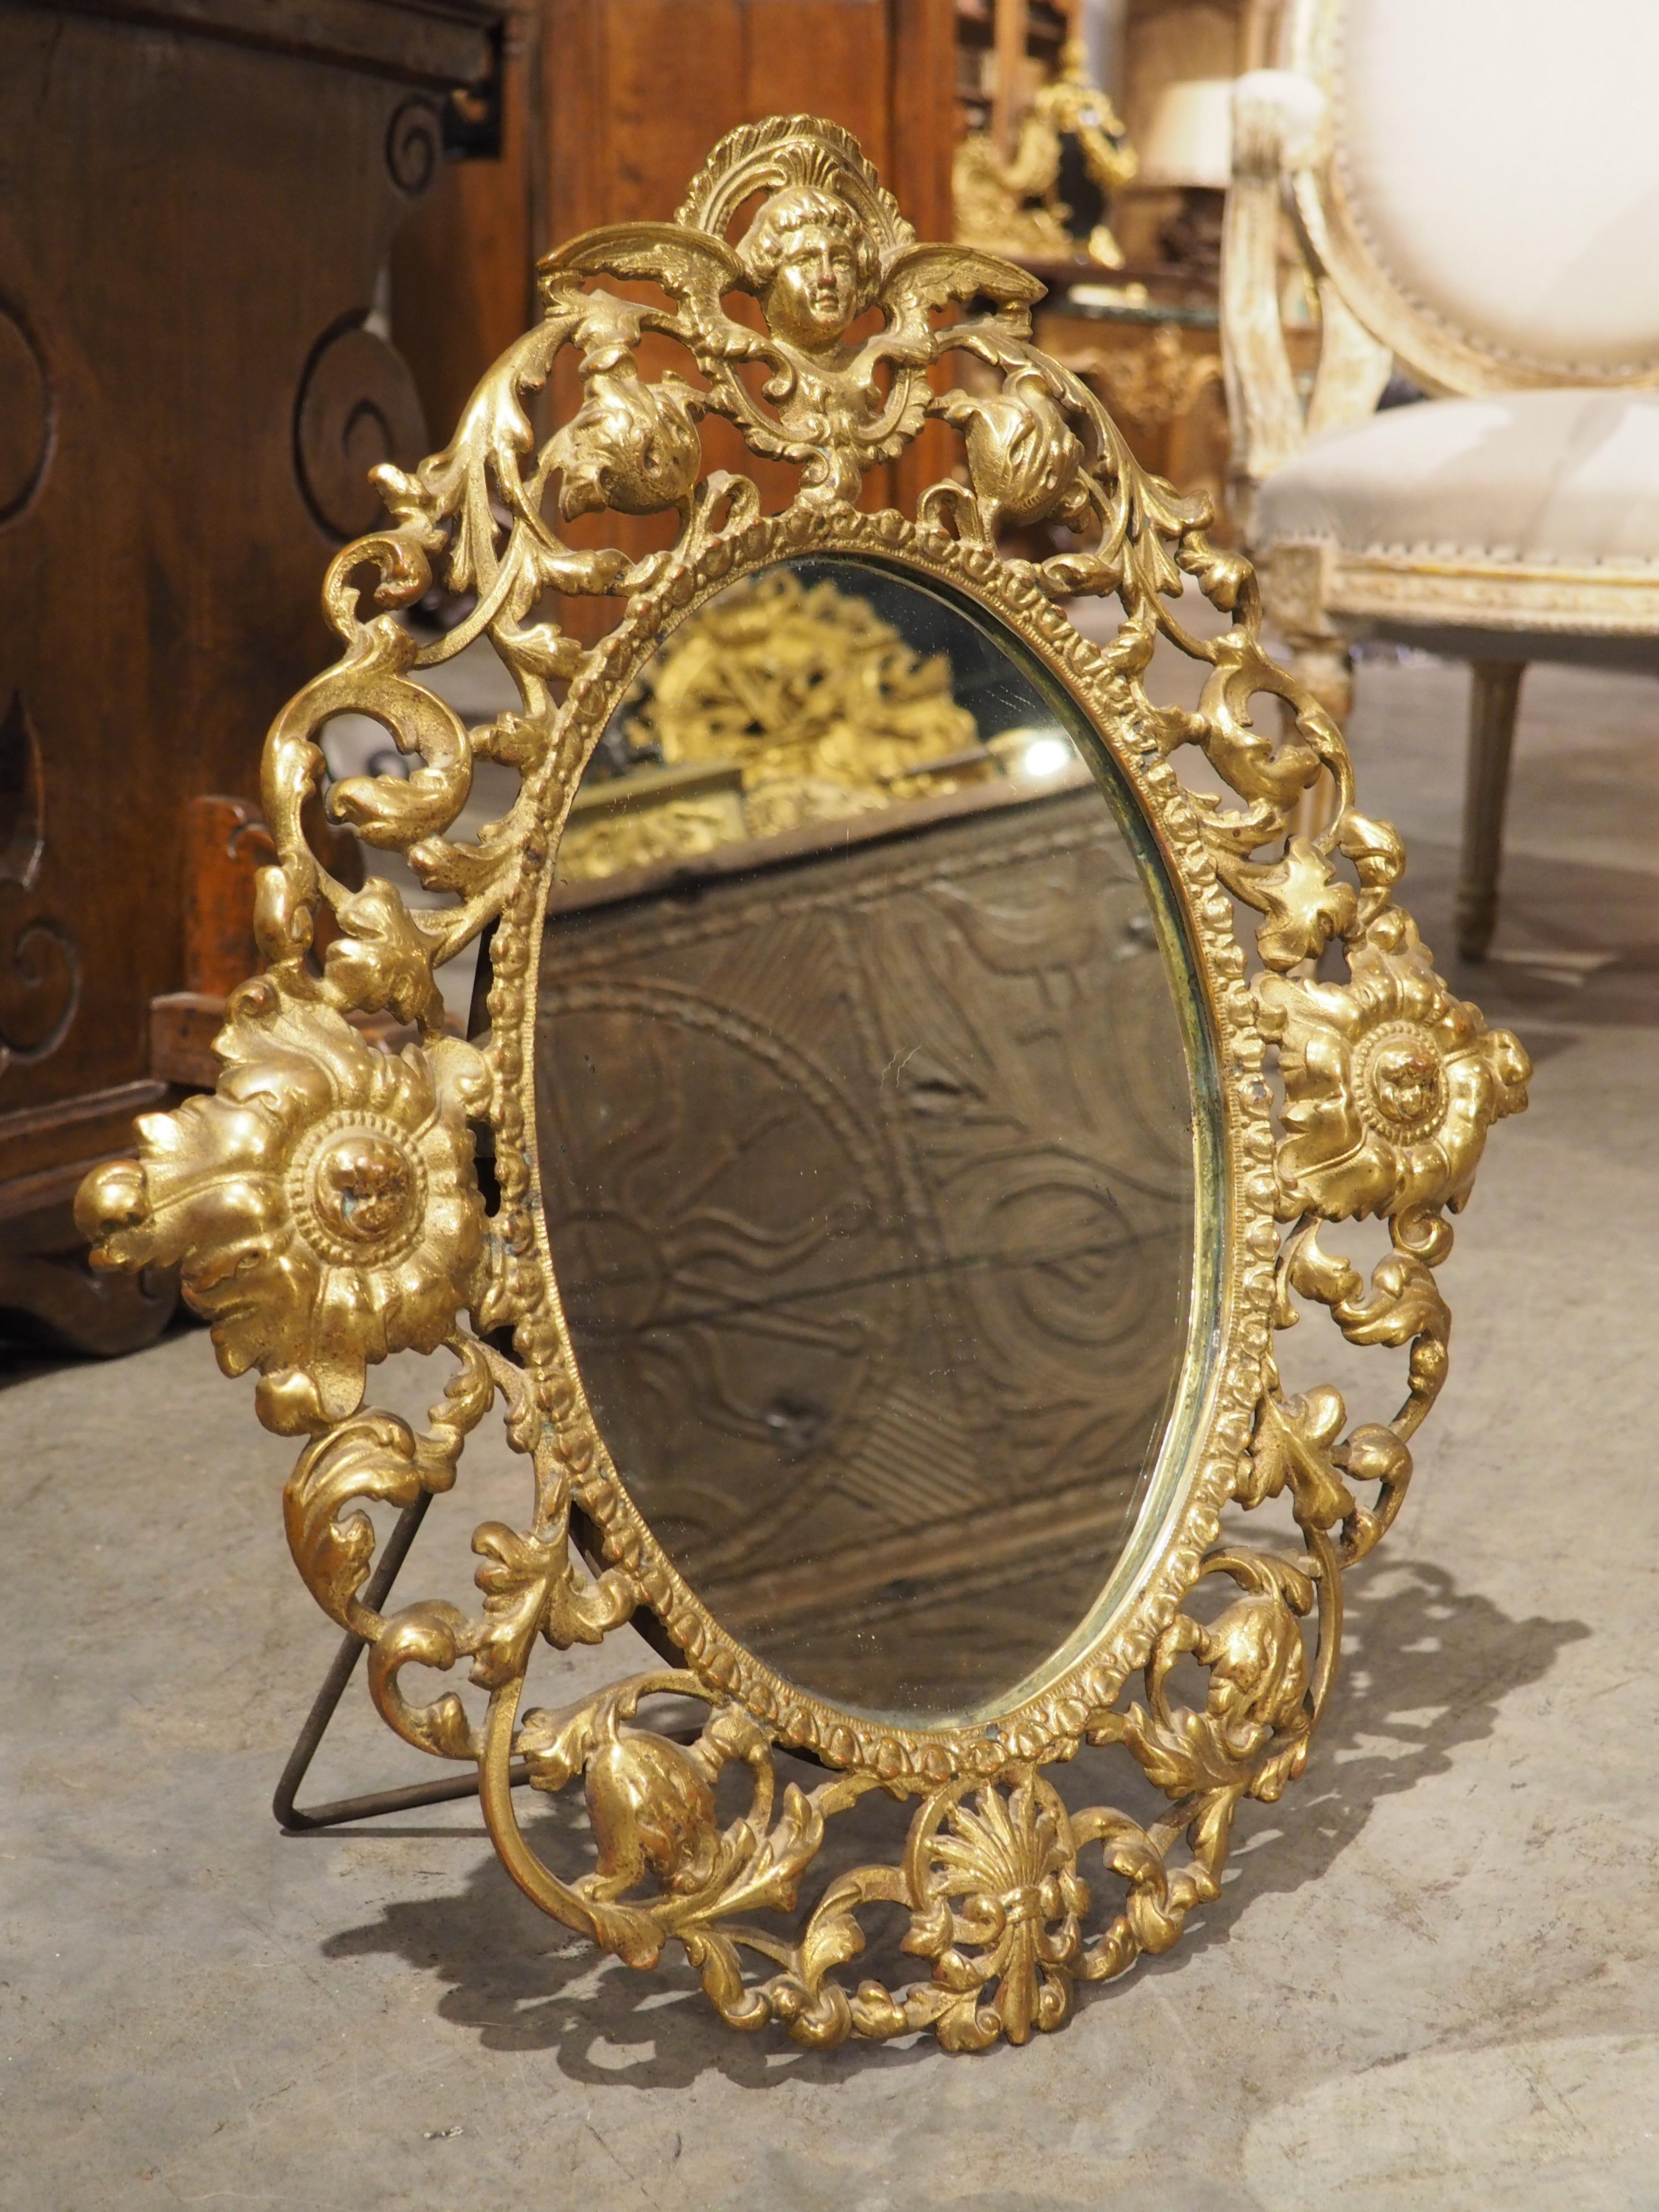 Circa 1900 Oval Gilt Bronze Table Mirror from Italy For Sale 9